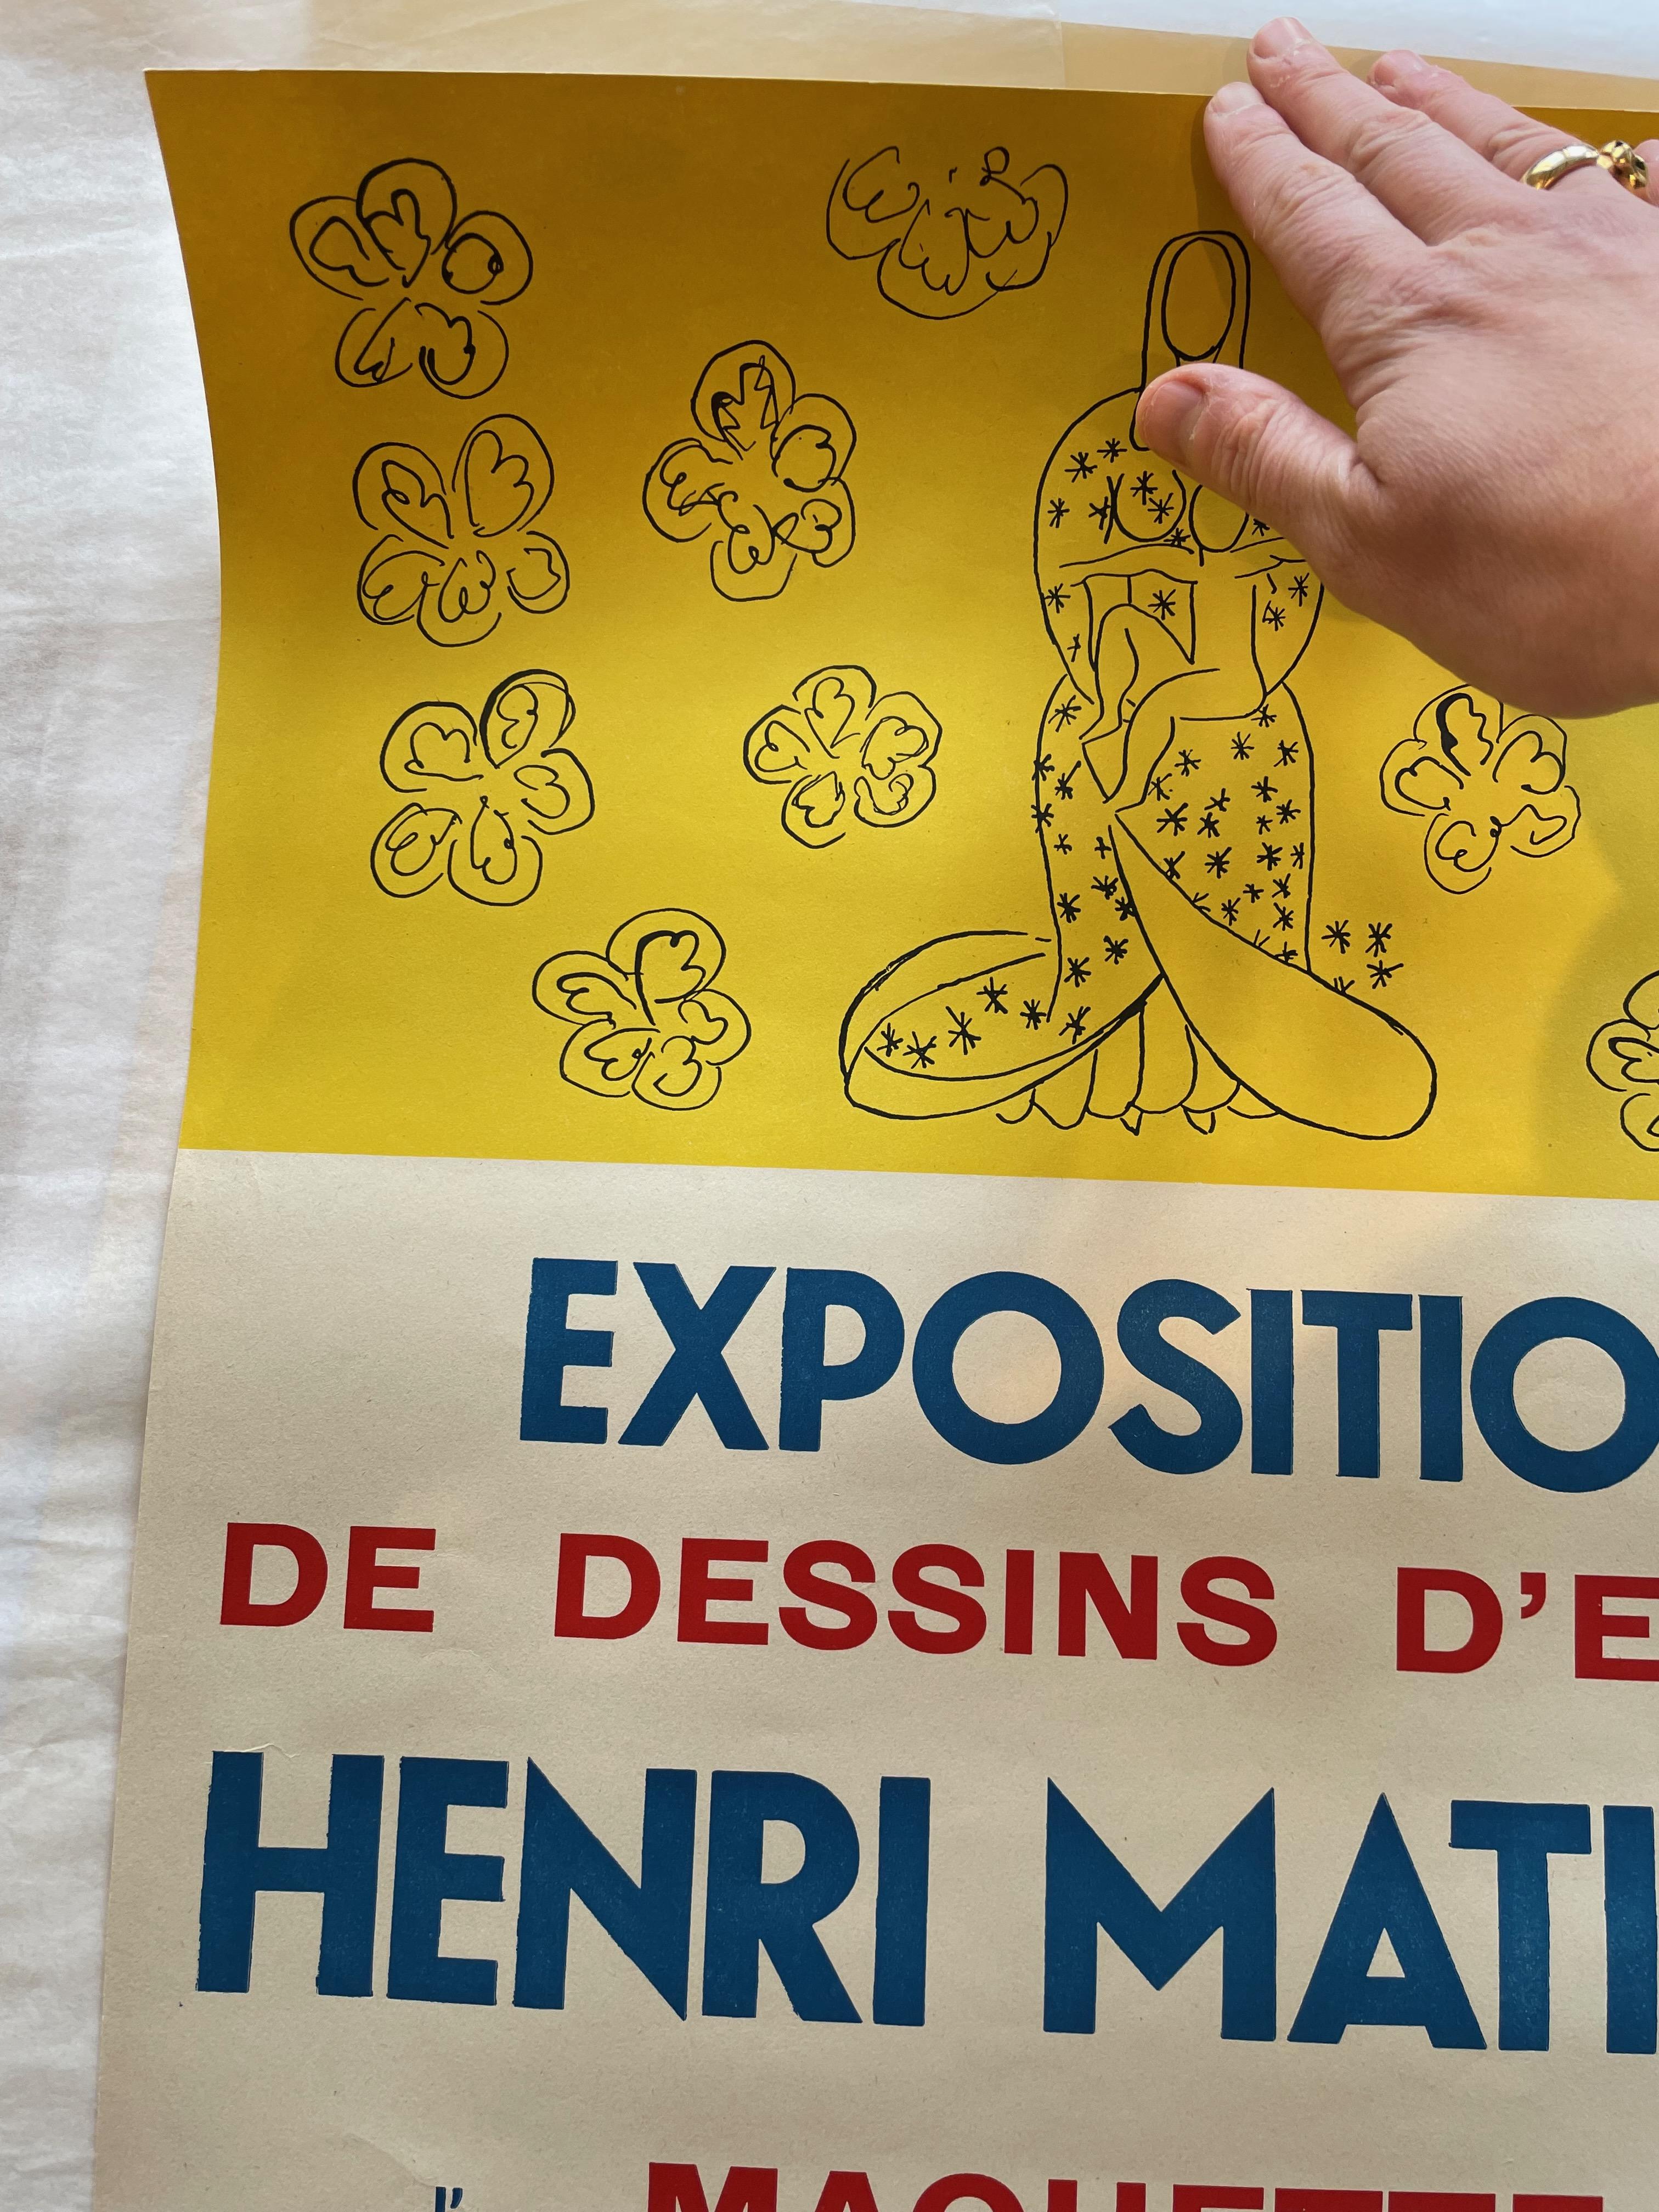 A vibrant poster for an exhibition of Matisse’s studies for the Dominican Chapel in the medieval town of Vence on the French Riviera. 

Artist: Henri Matisse
Title: Exposition De Dessin's D'Etude 
Medium: Lithograph 
Year: 1949
Size: 60.5 x